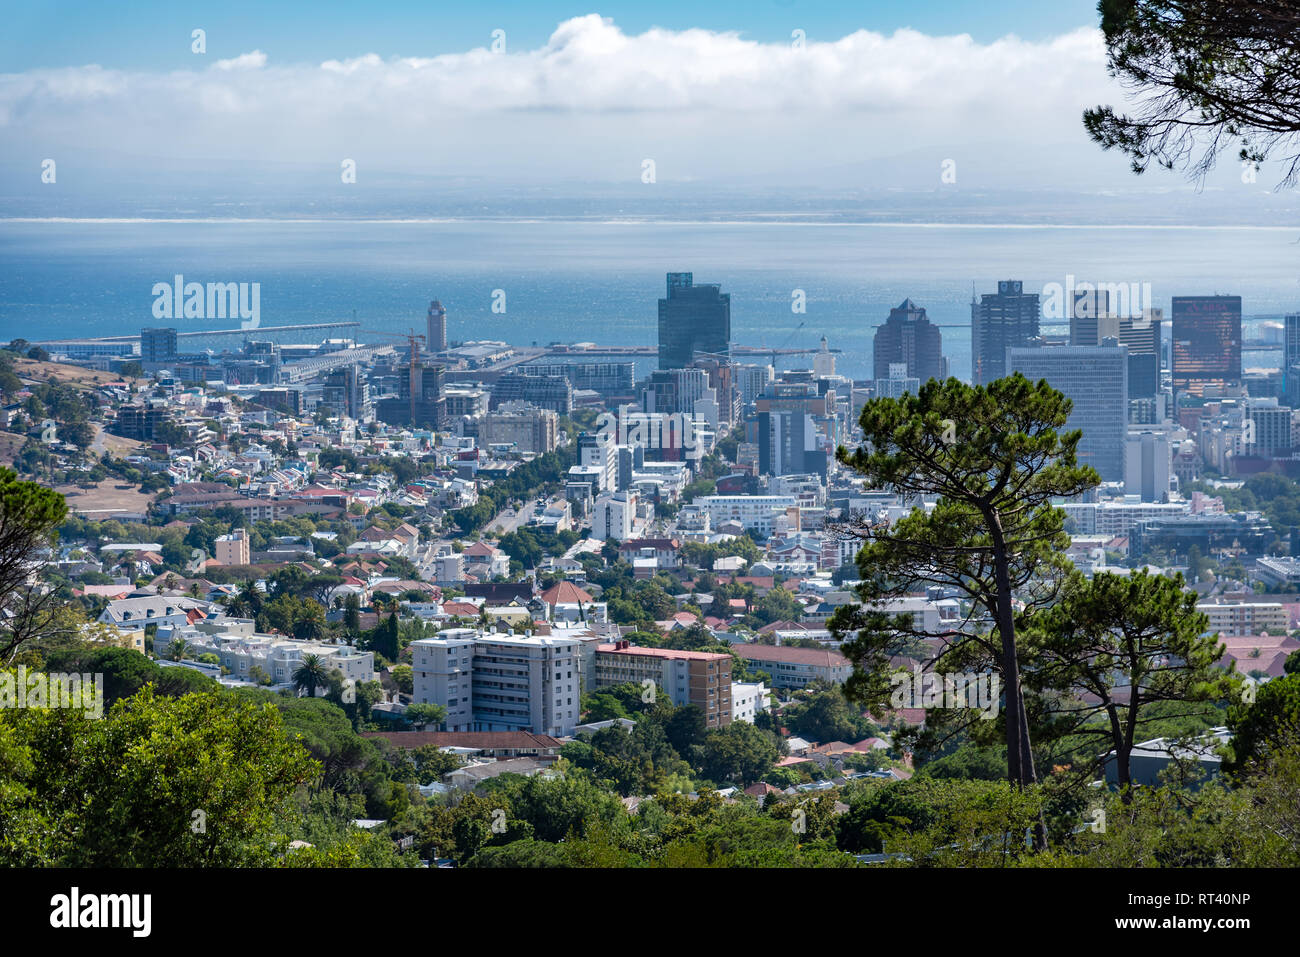 The view over Cape Town, South Africa Stock Photo